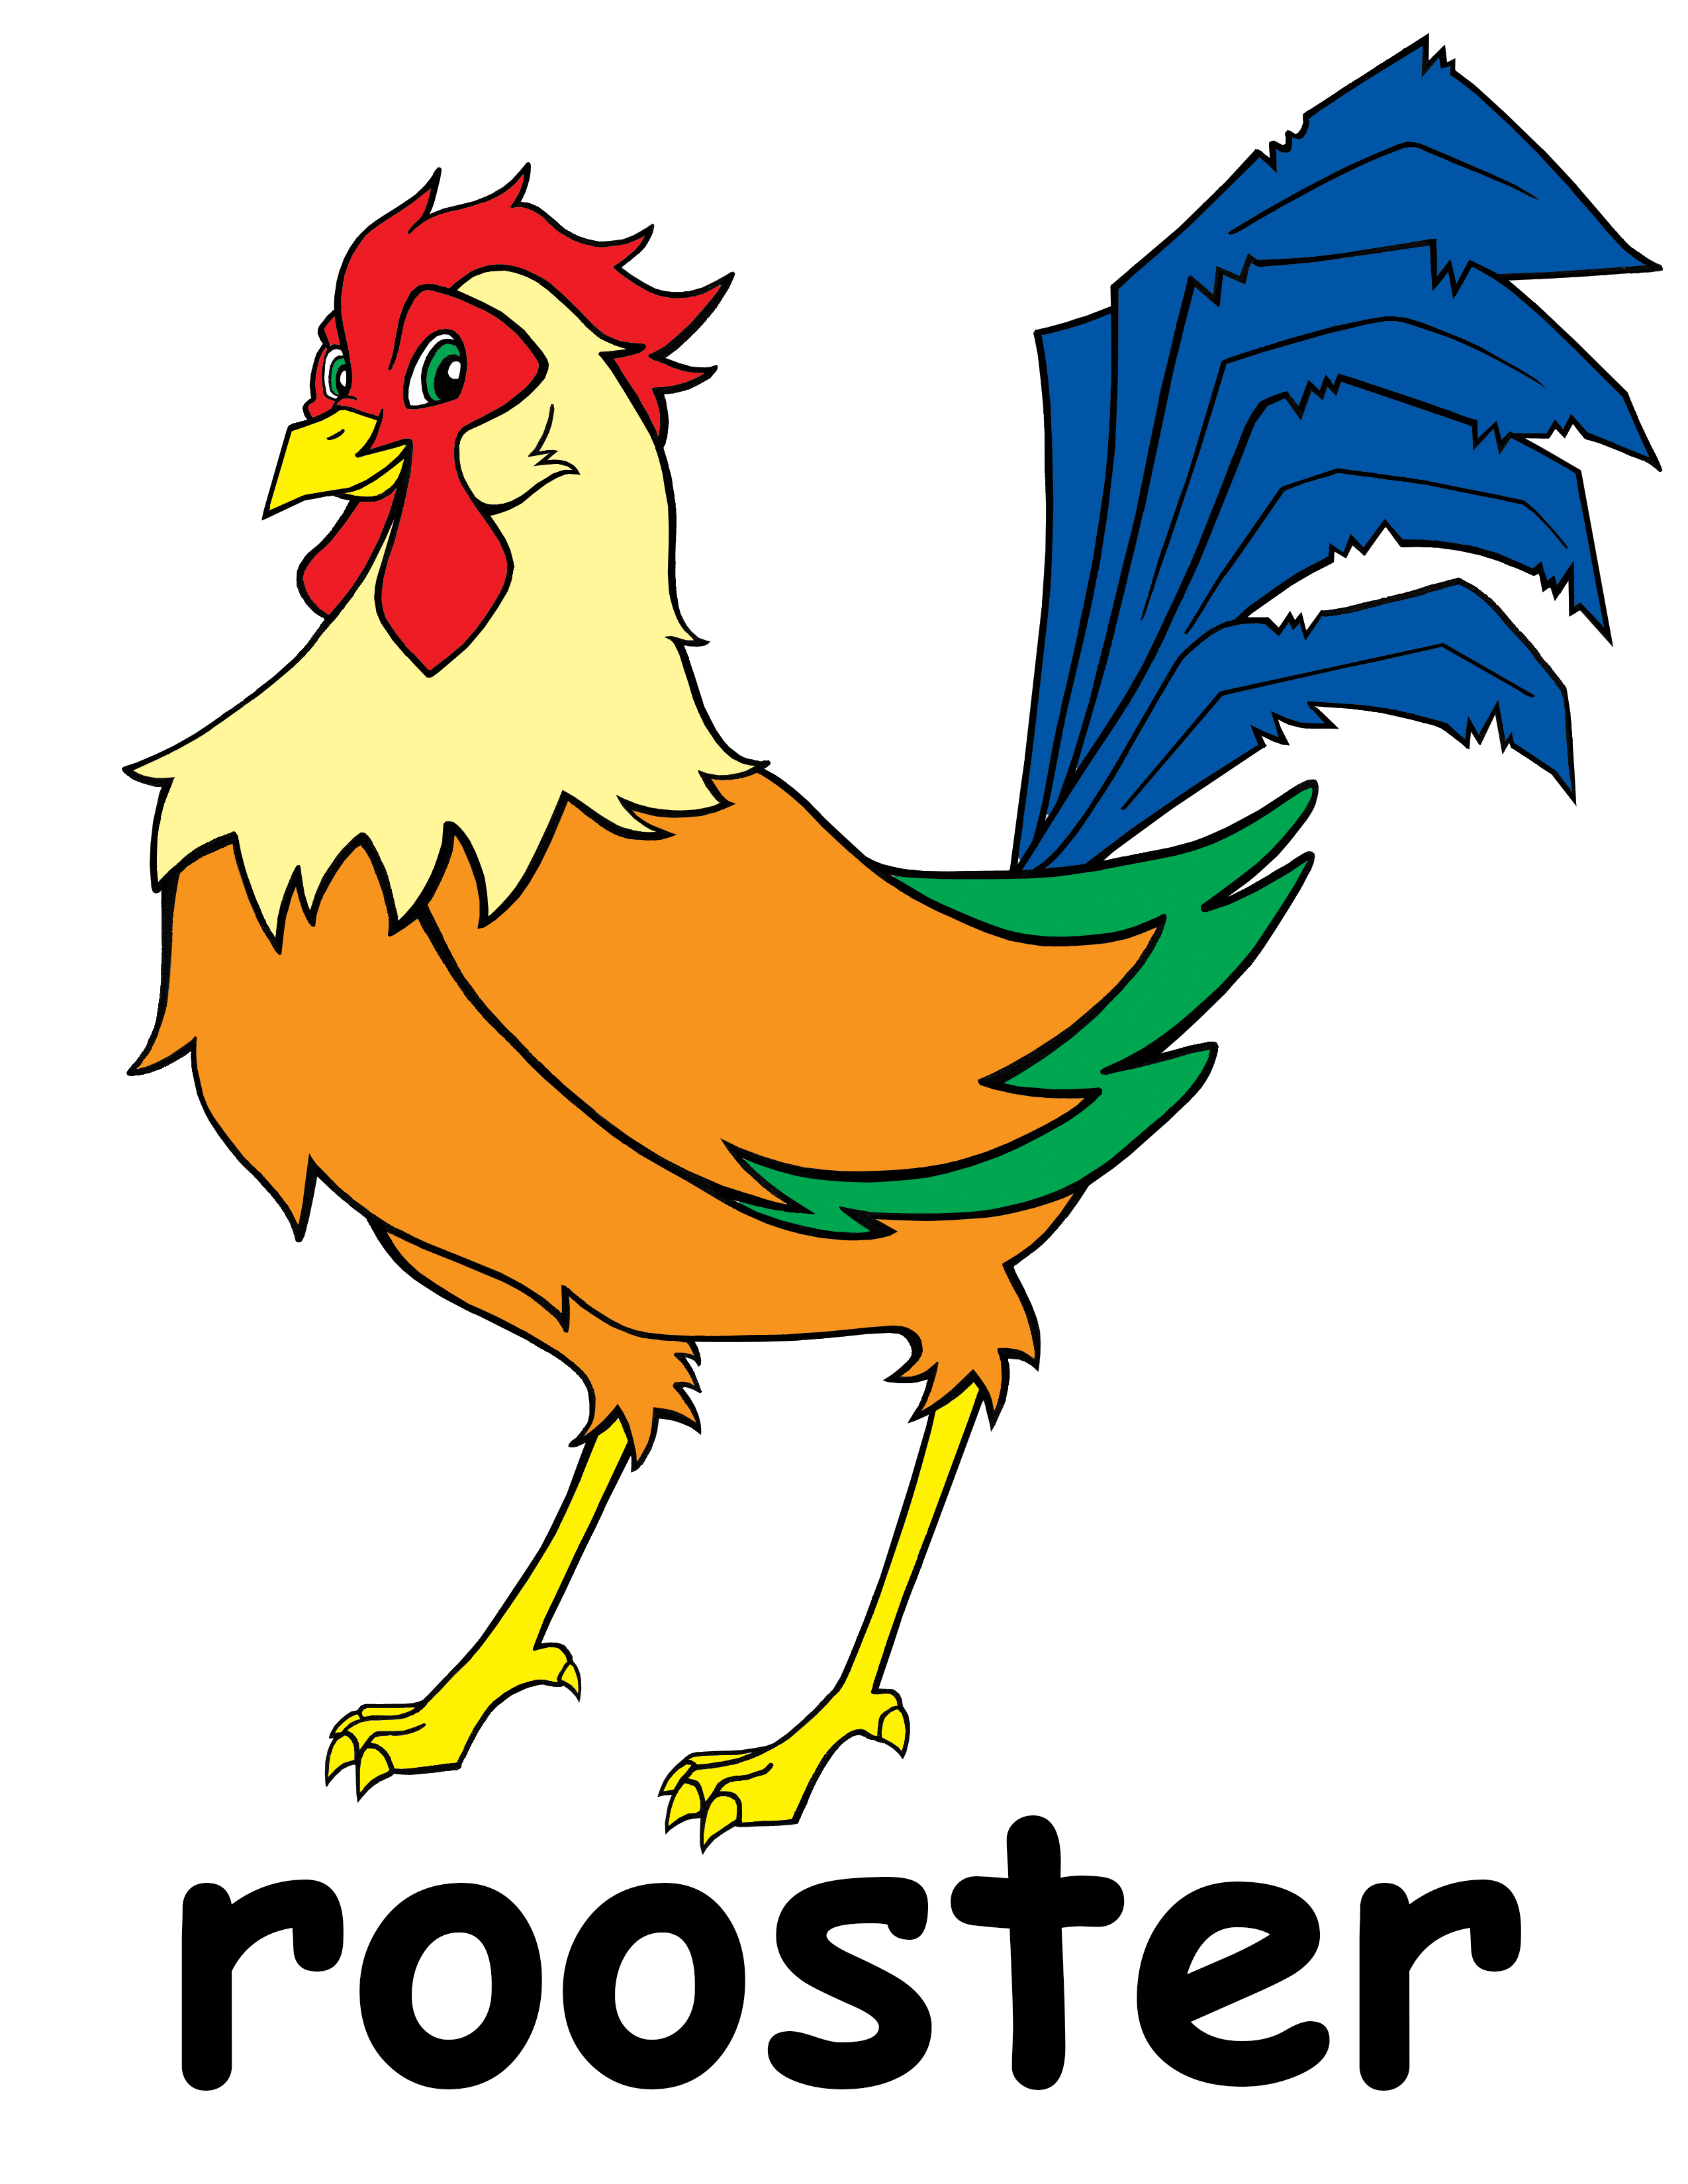 Rooster clip art cartoon free clipart images 4